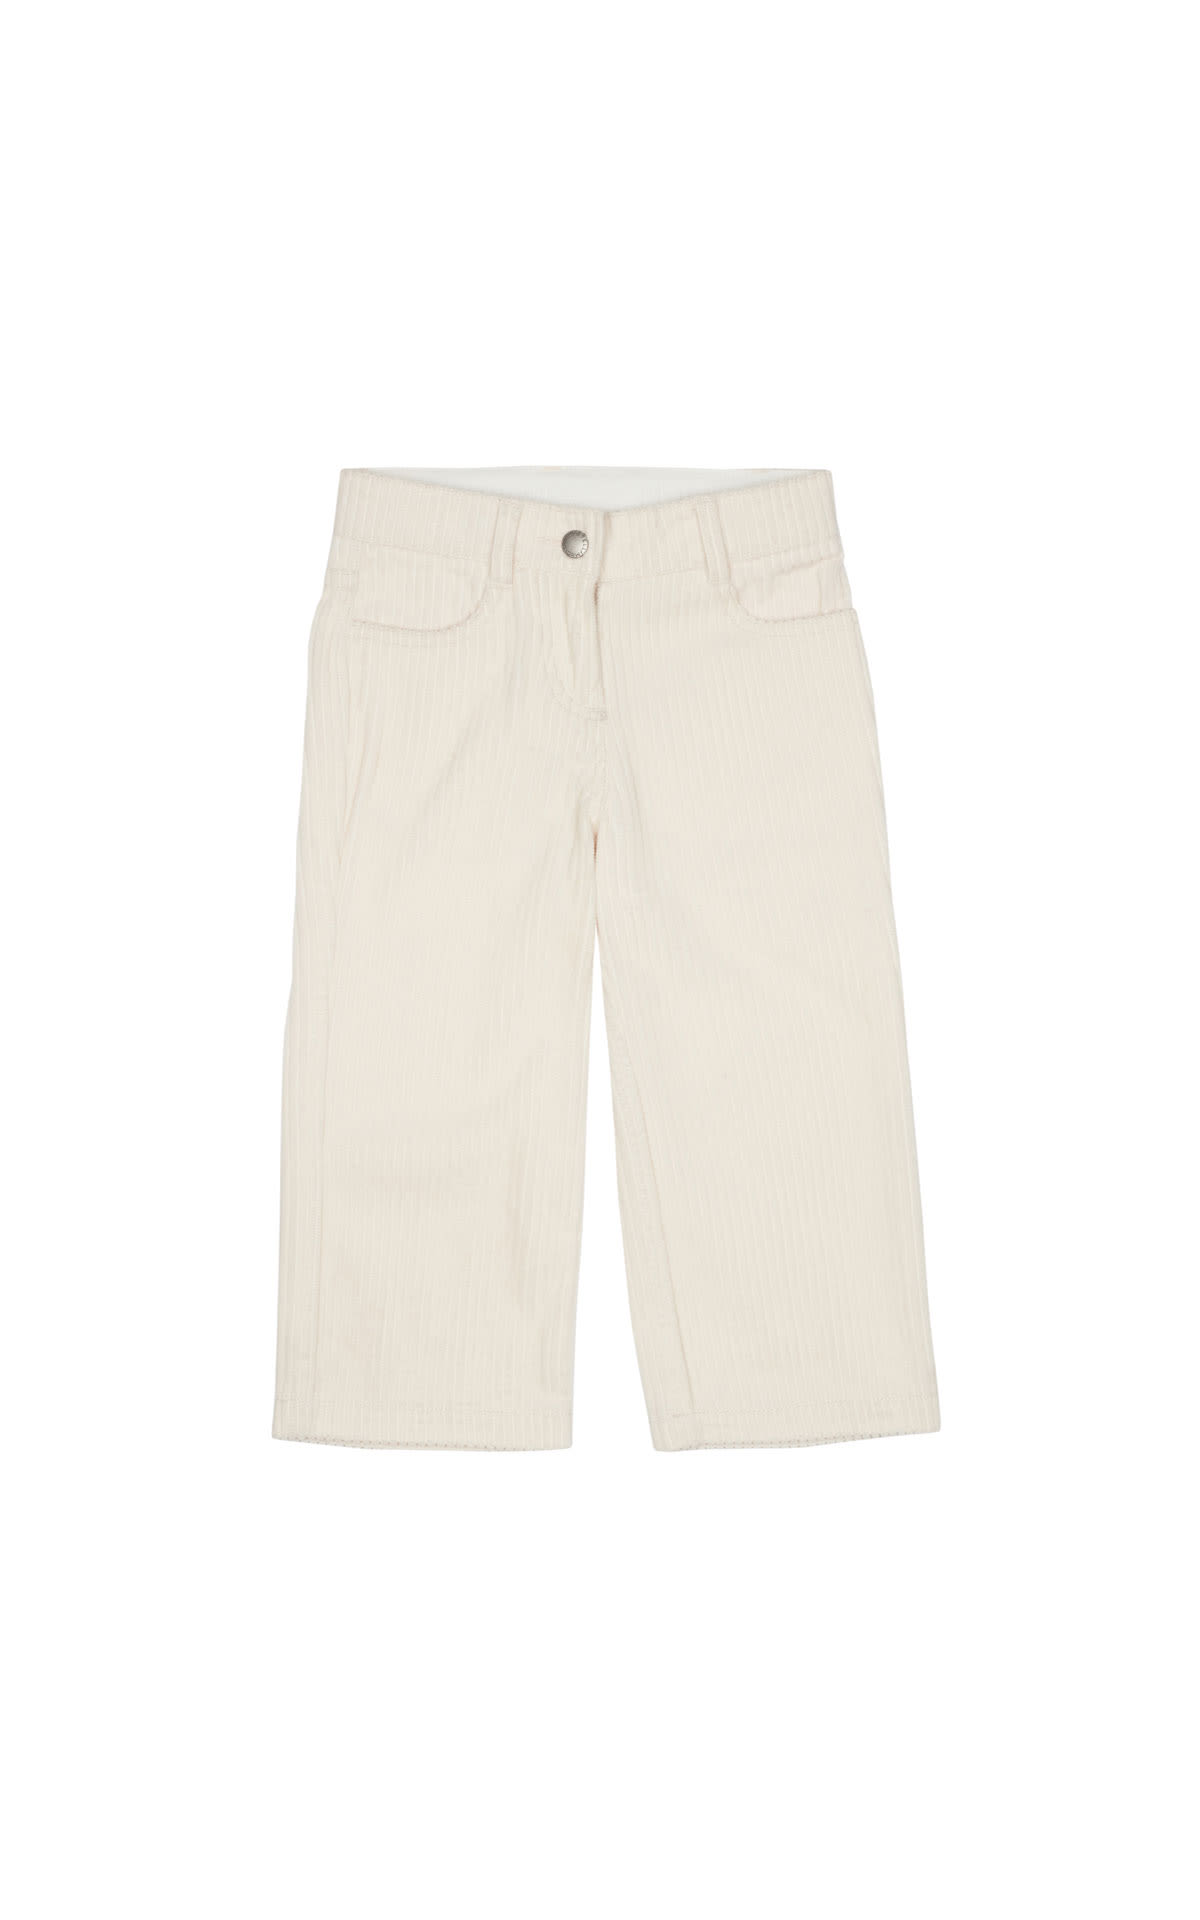 Stella McCartney Jumbo cord trousers from Bicester Village